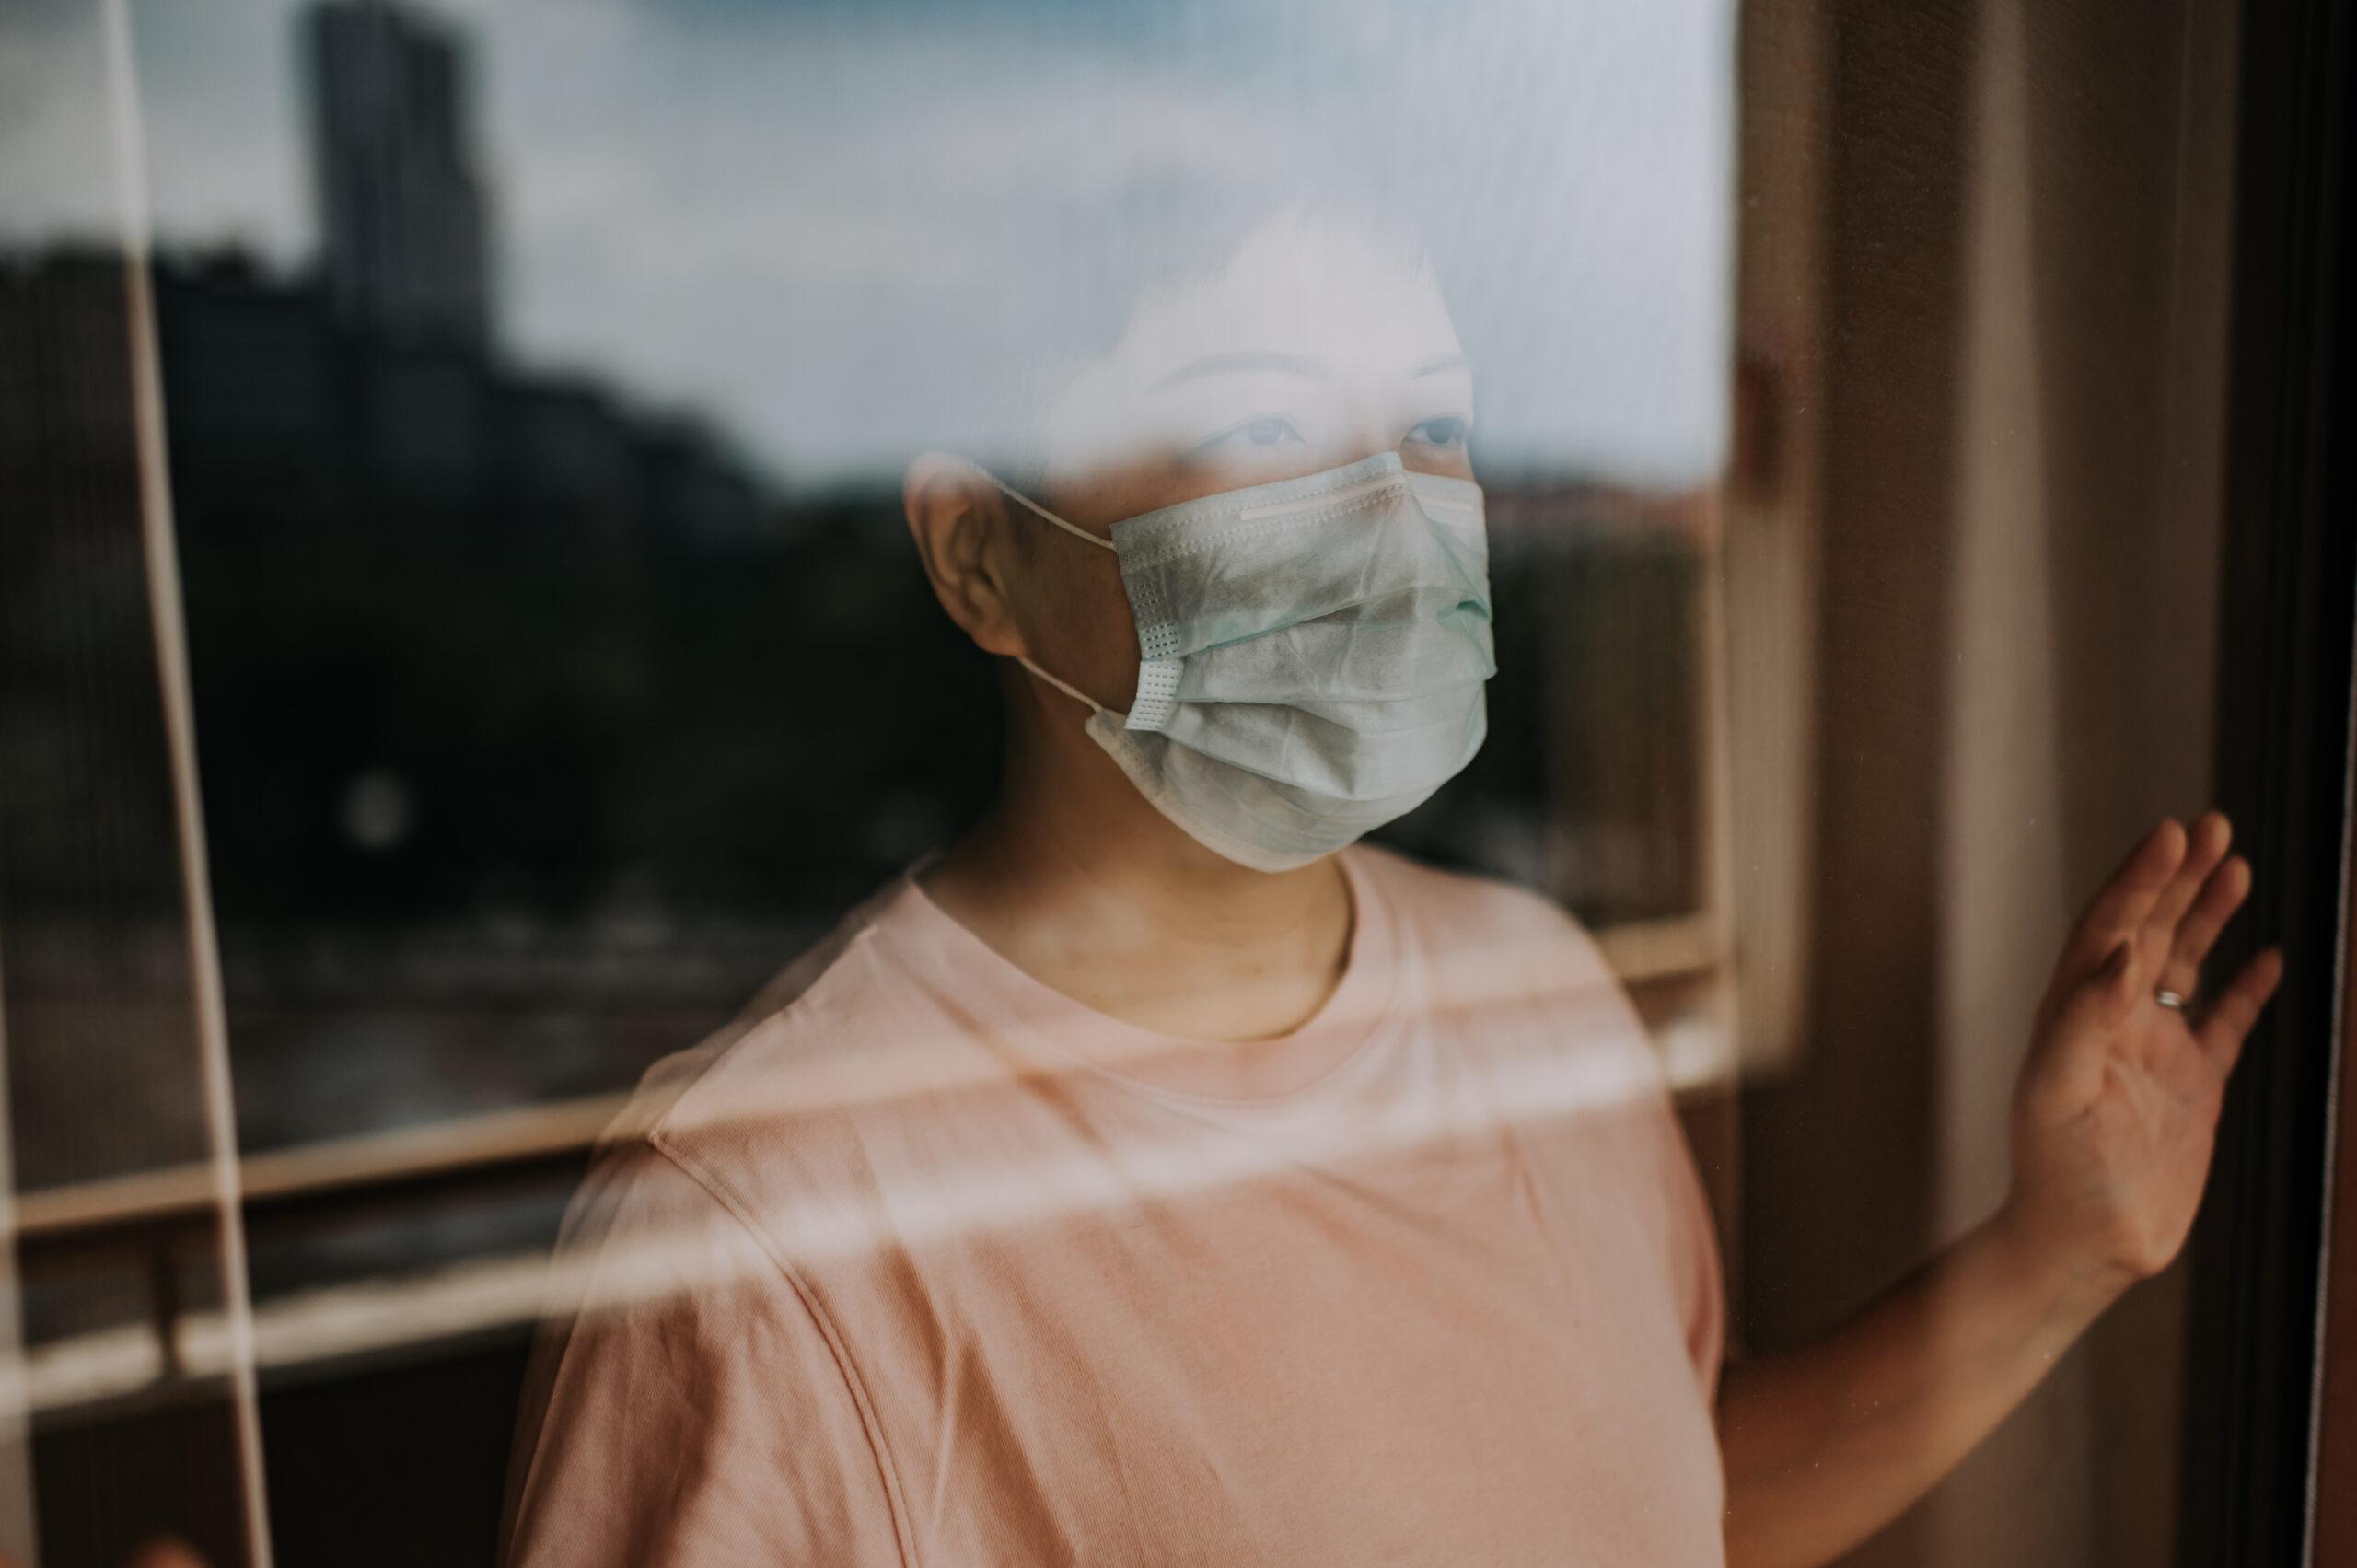 A woman wearing a blue surgical mask and a pink t-shirt looks out a window.